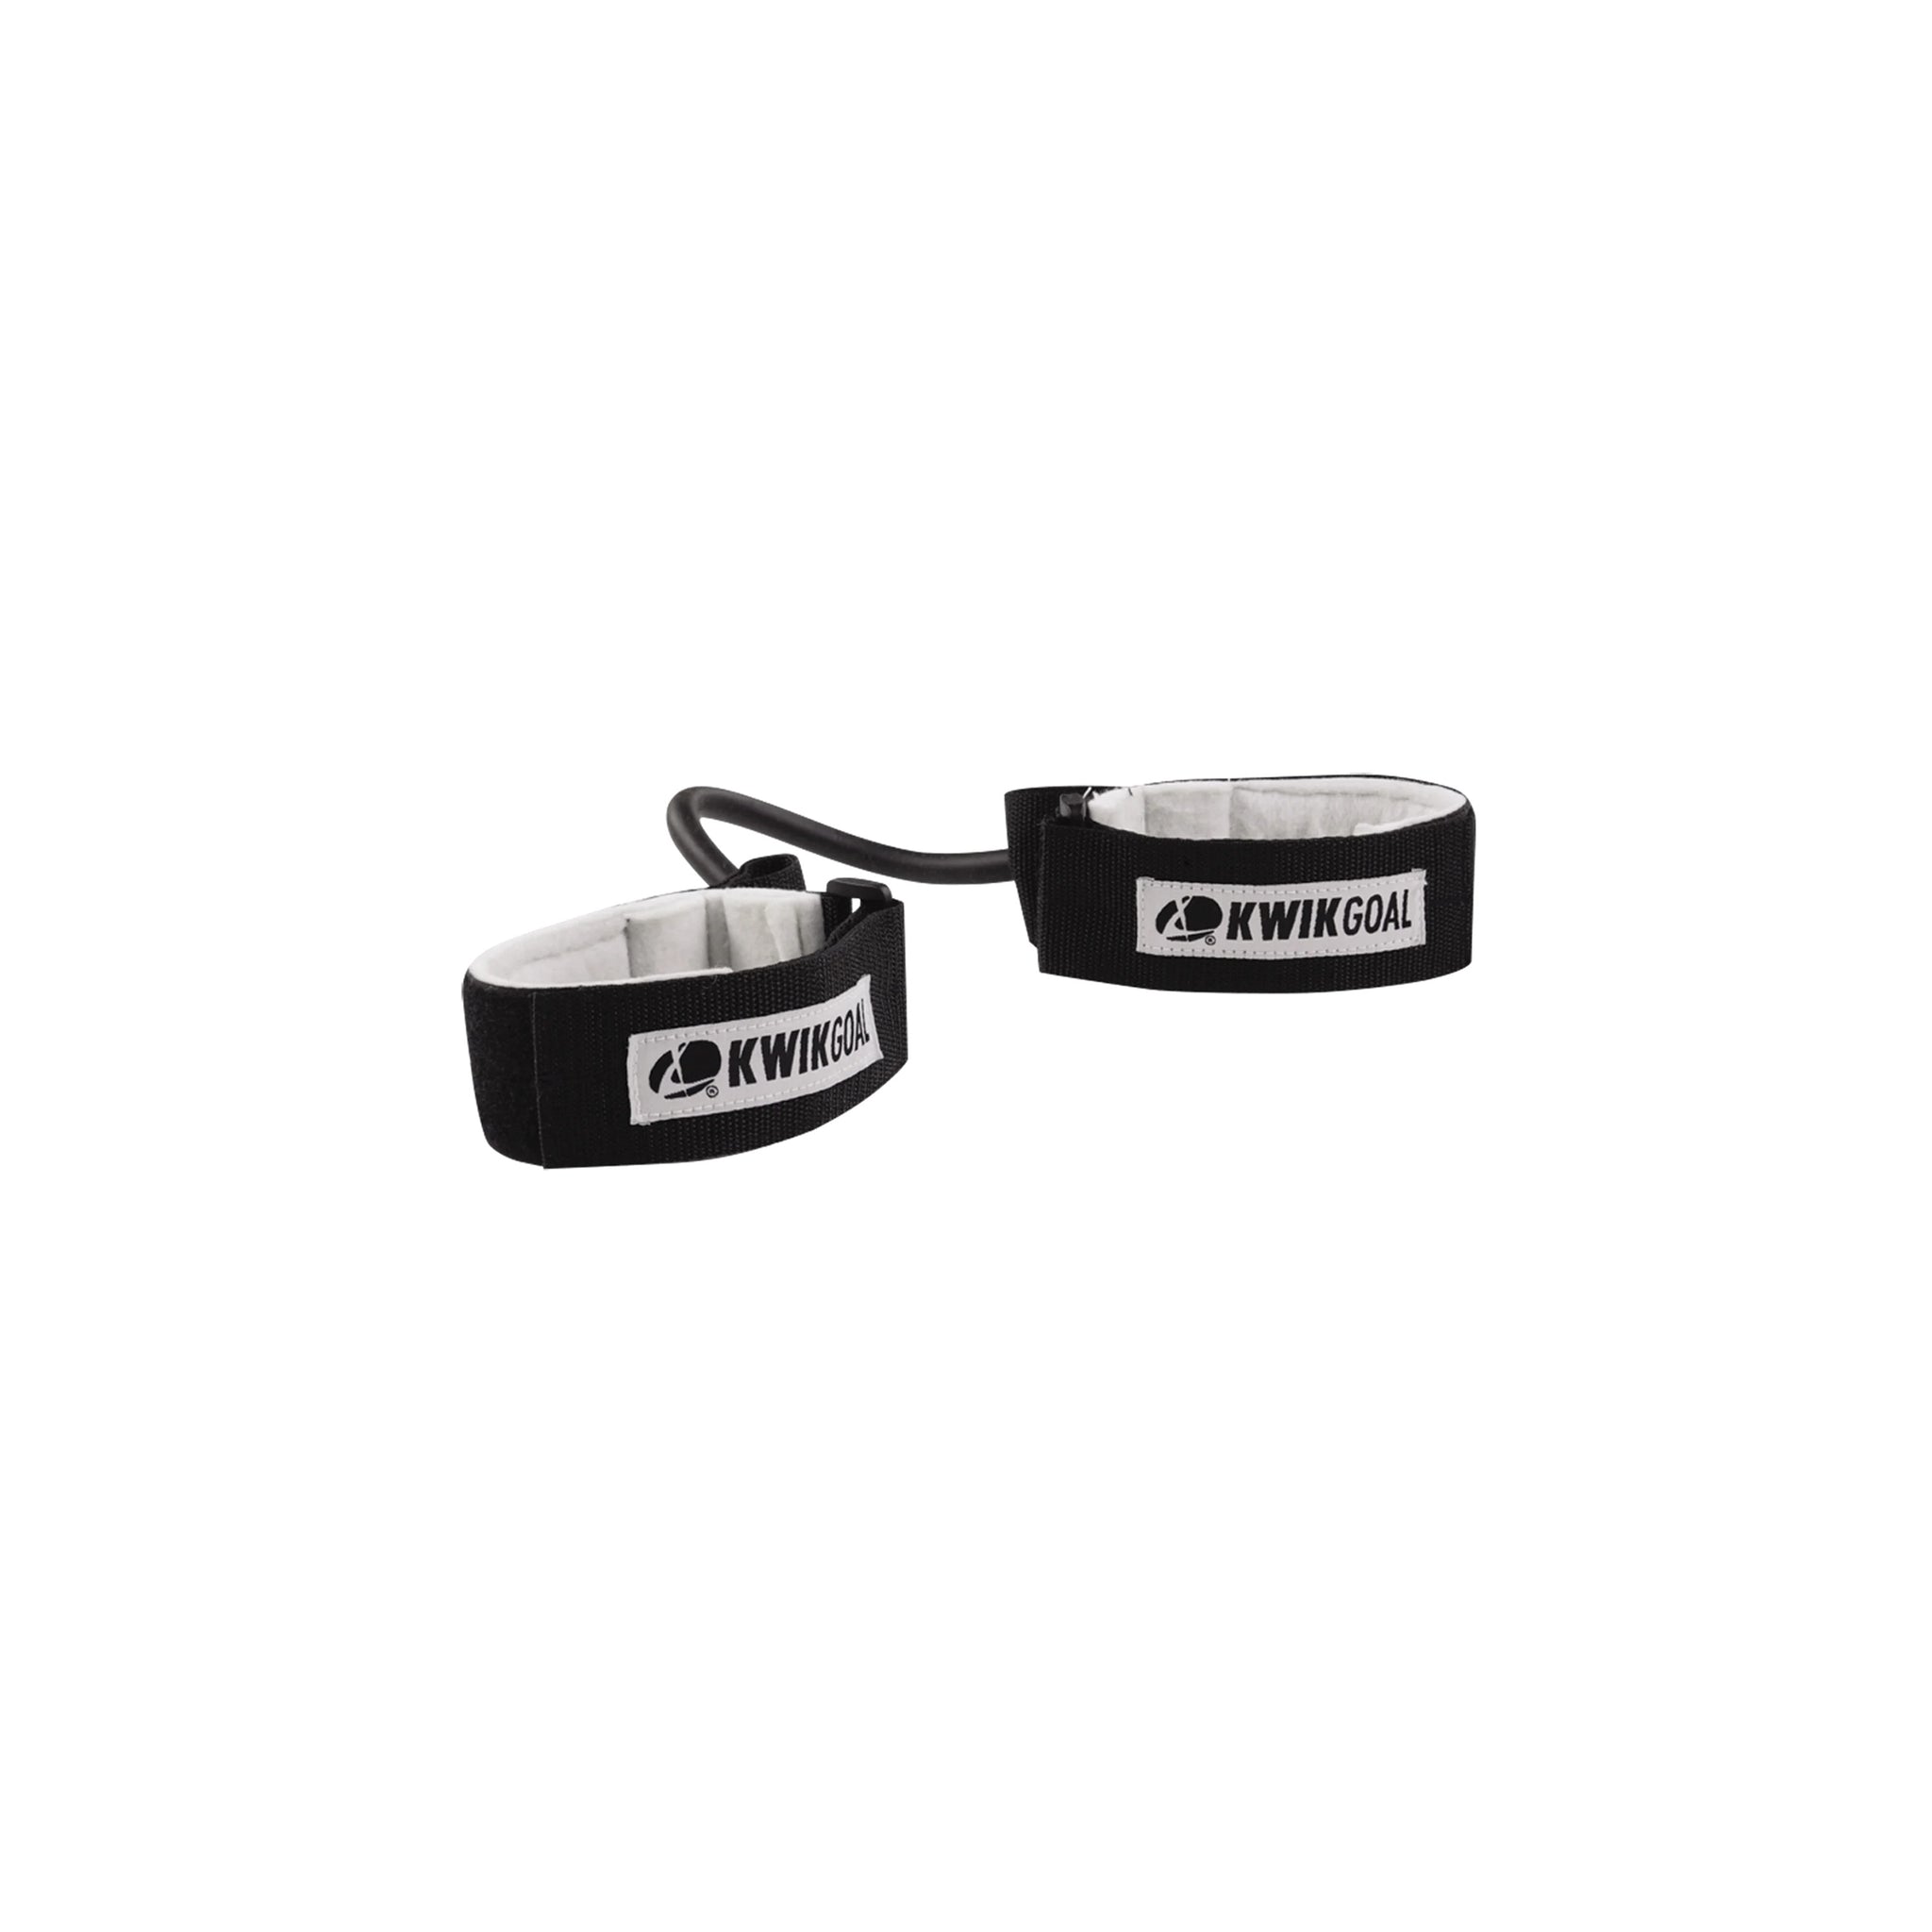 KWIK GOAL Ankle Speed Bands